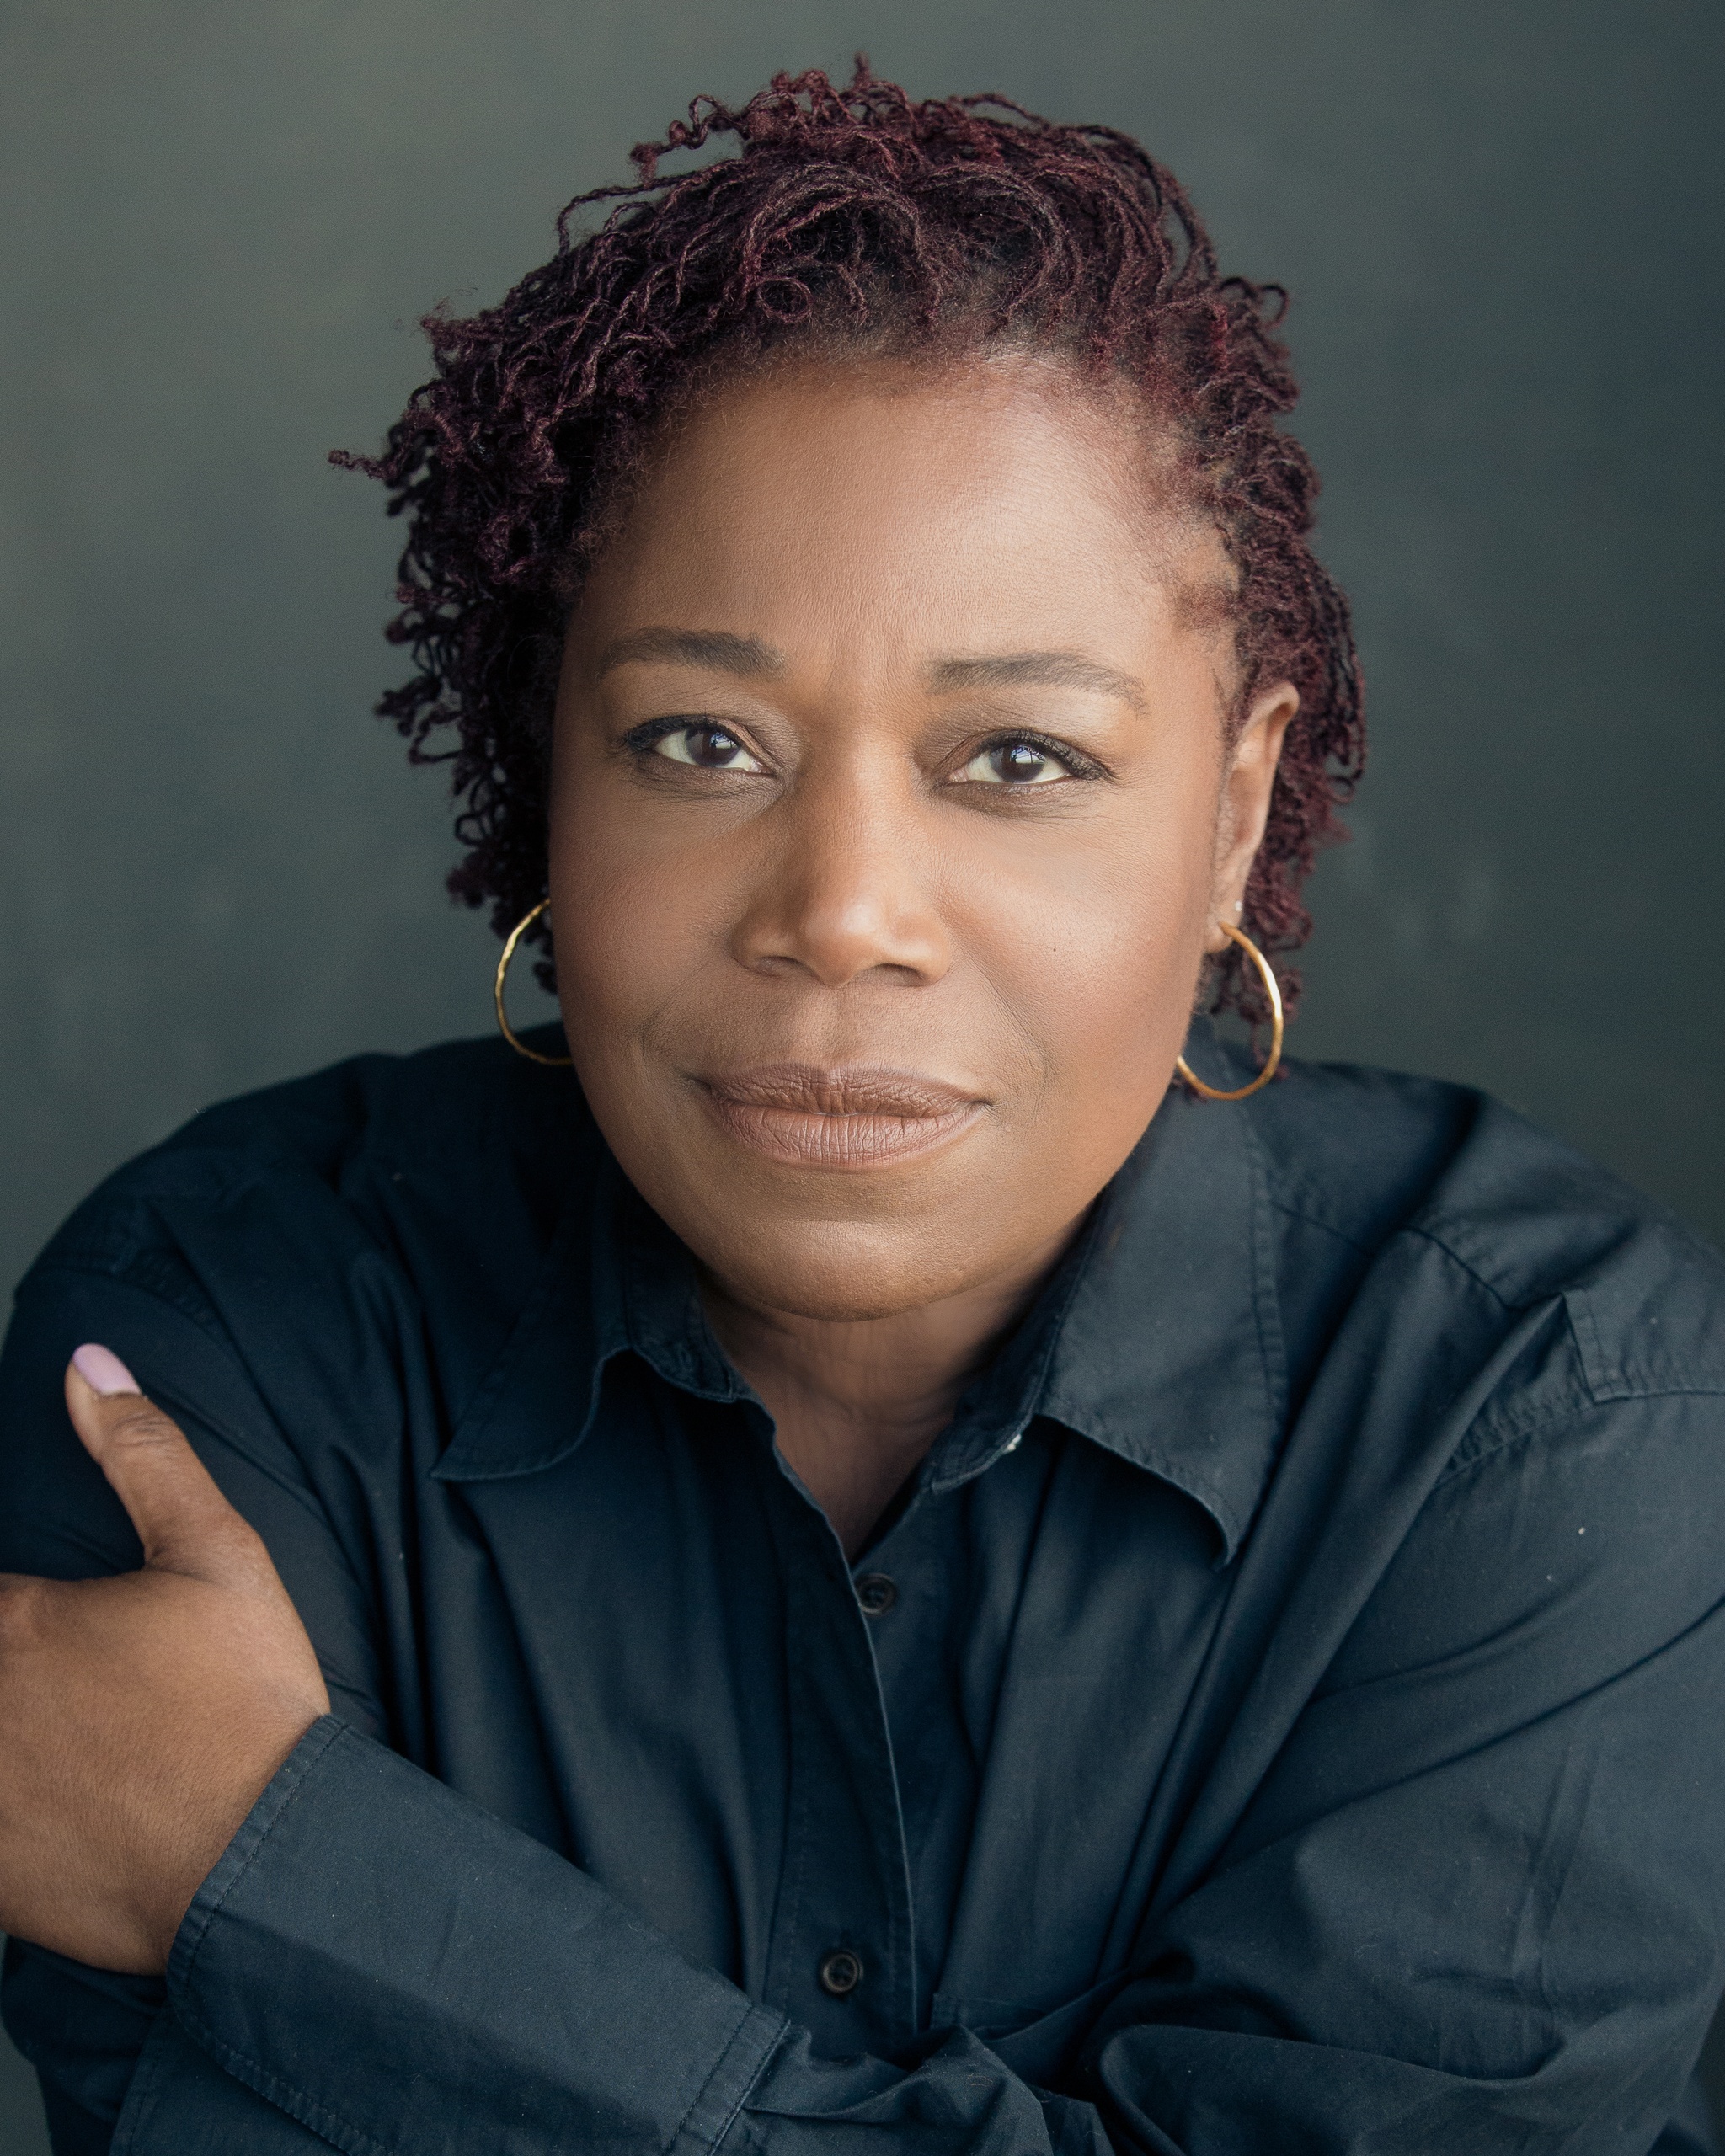 A portrait of Michele Austin, a Black actor with short auburn hair twisted in short locs and swept to the side. She wears a gray button down shirt and holds one hand up to her shoulder while looking at us with a slight smile.